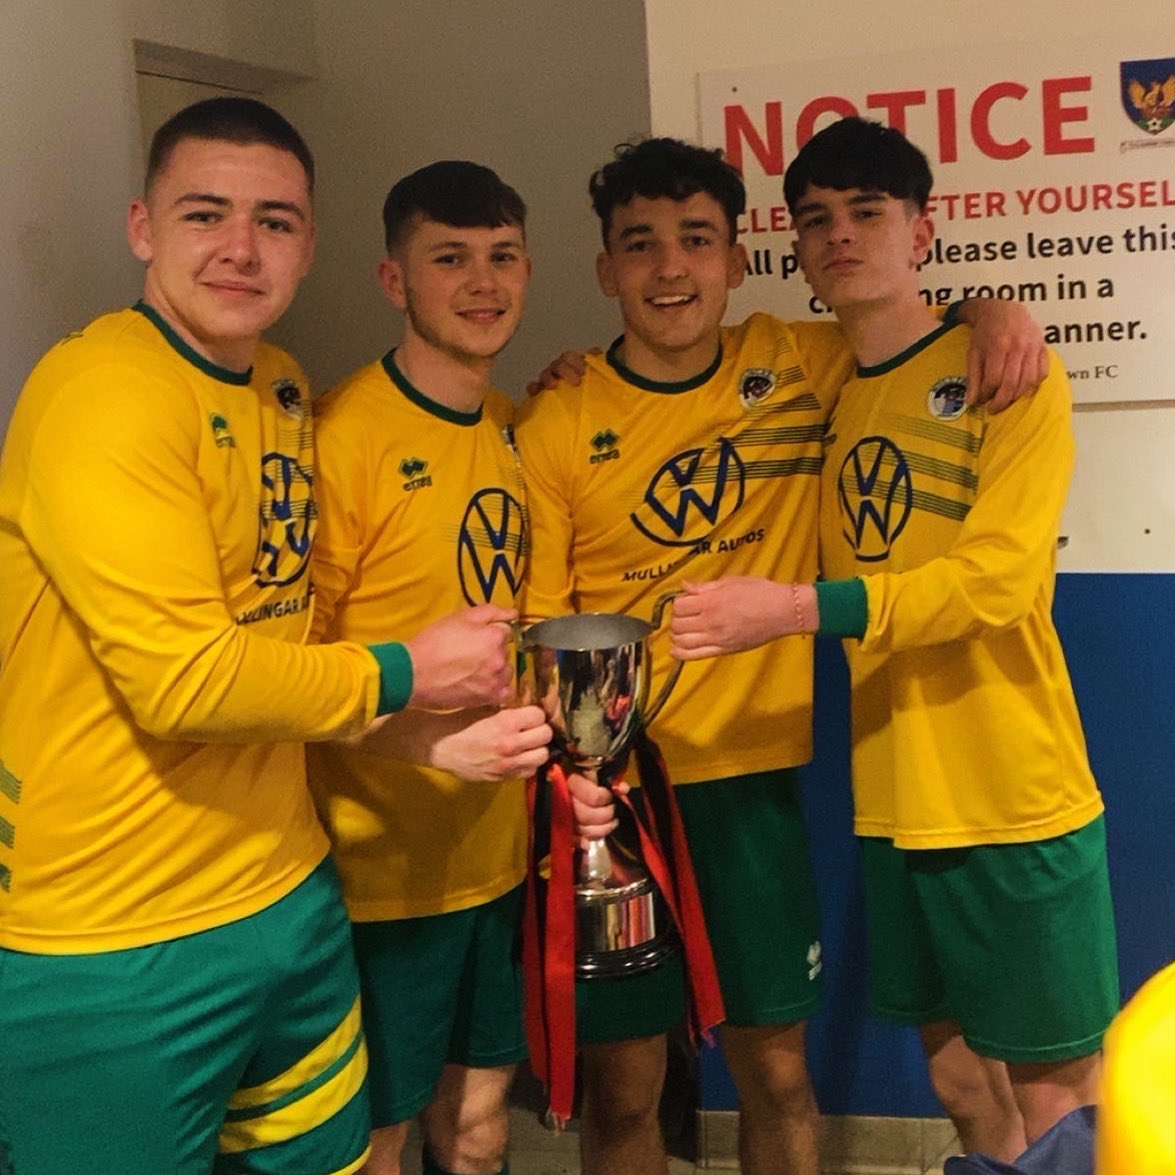 🏆 LEAGUE CHAMPIONS 🏆

Congratulations to MCC students Emmet, Callum, Nathan and Alex who recently starred in Mullingar Athletic’s title-winning team. 

Your hard work, teamwork, and dedication have paid off! ⚽️ 

#LeagueChampions